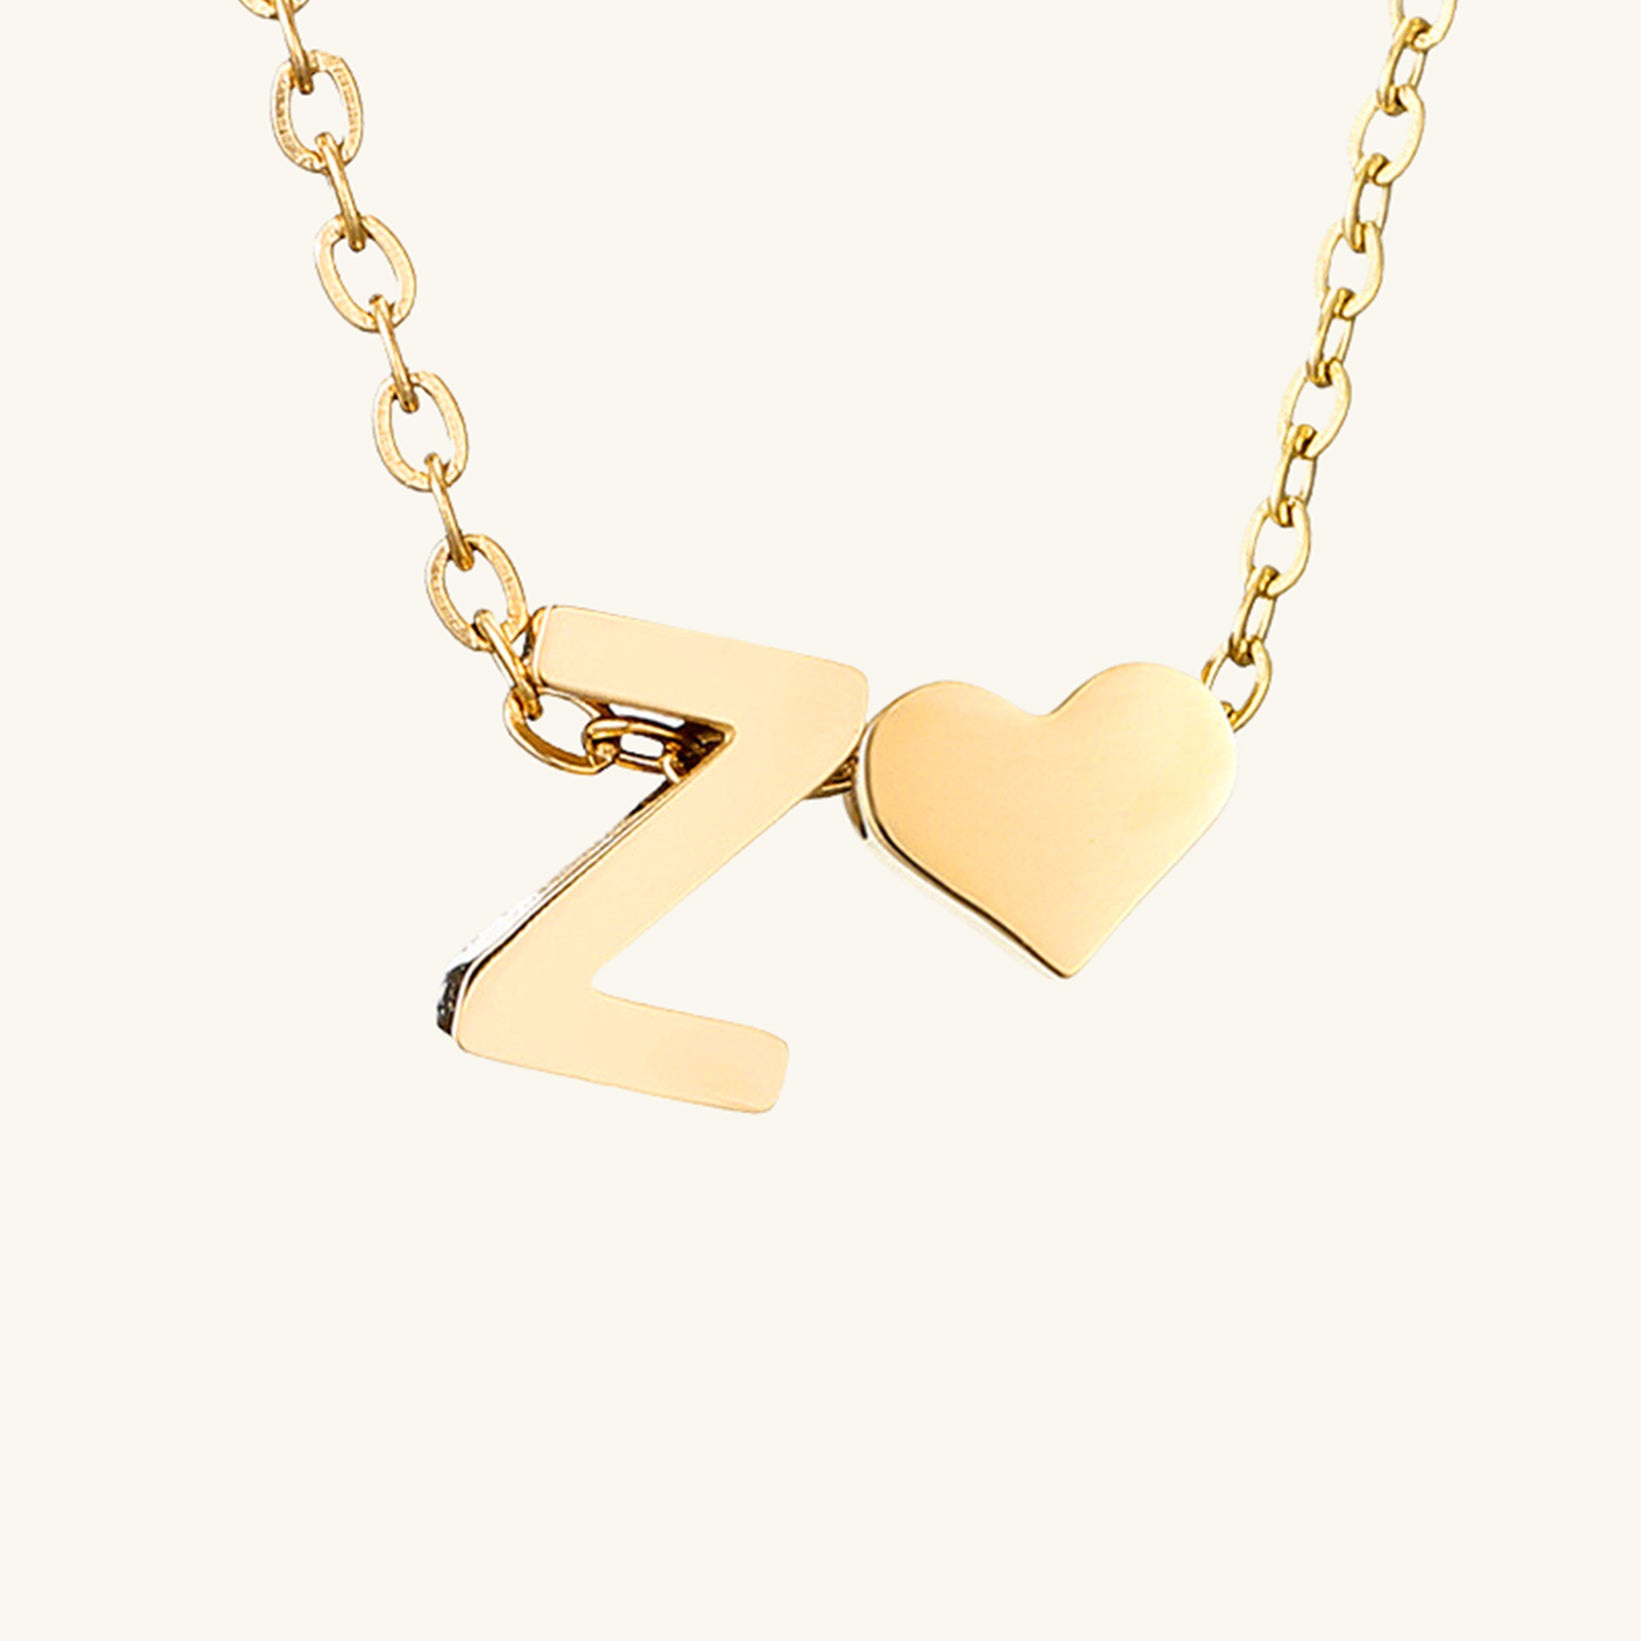 Small Heart Initial Letter Necklace - Wrenlee